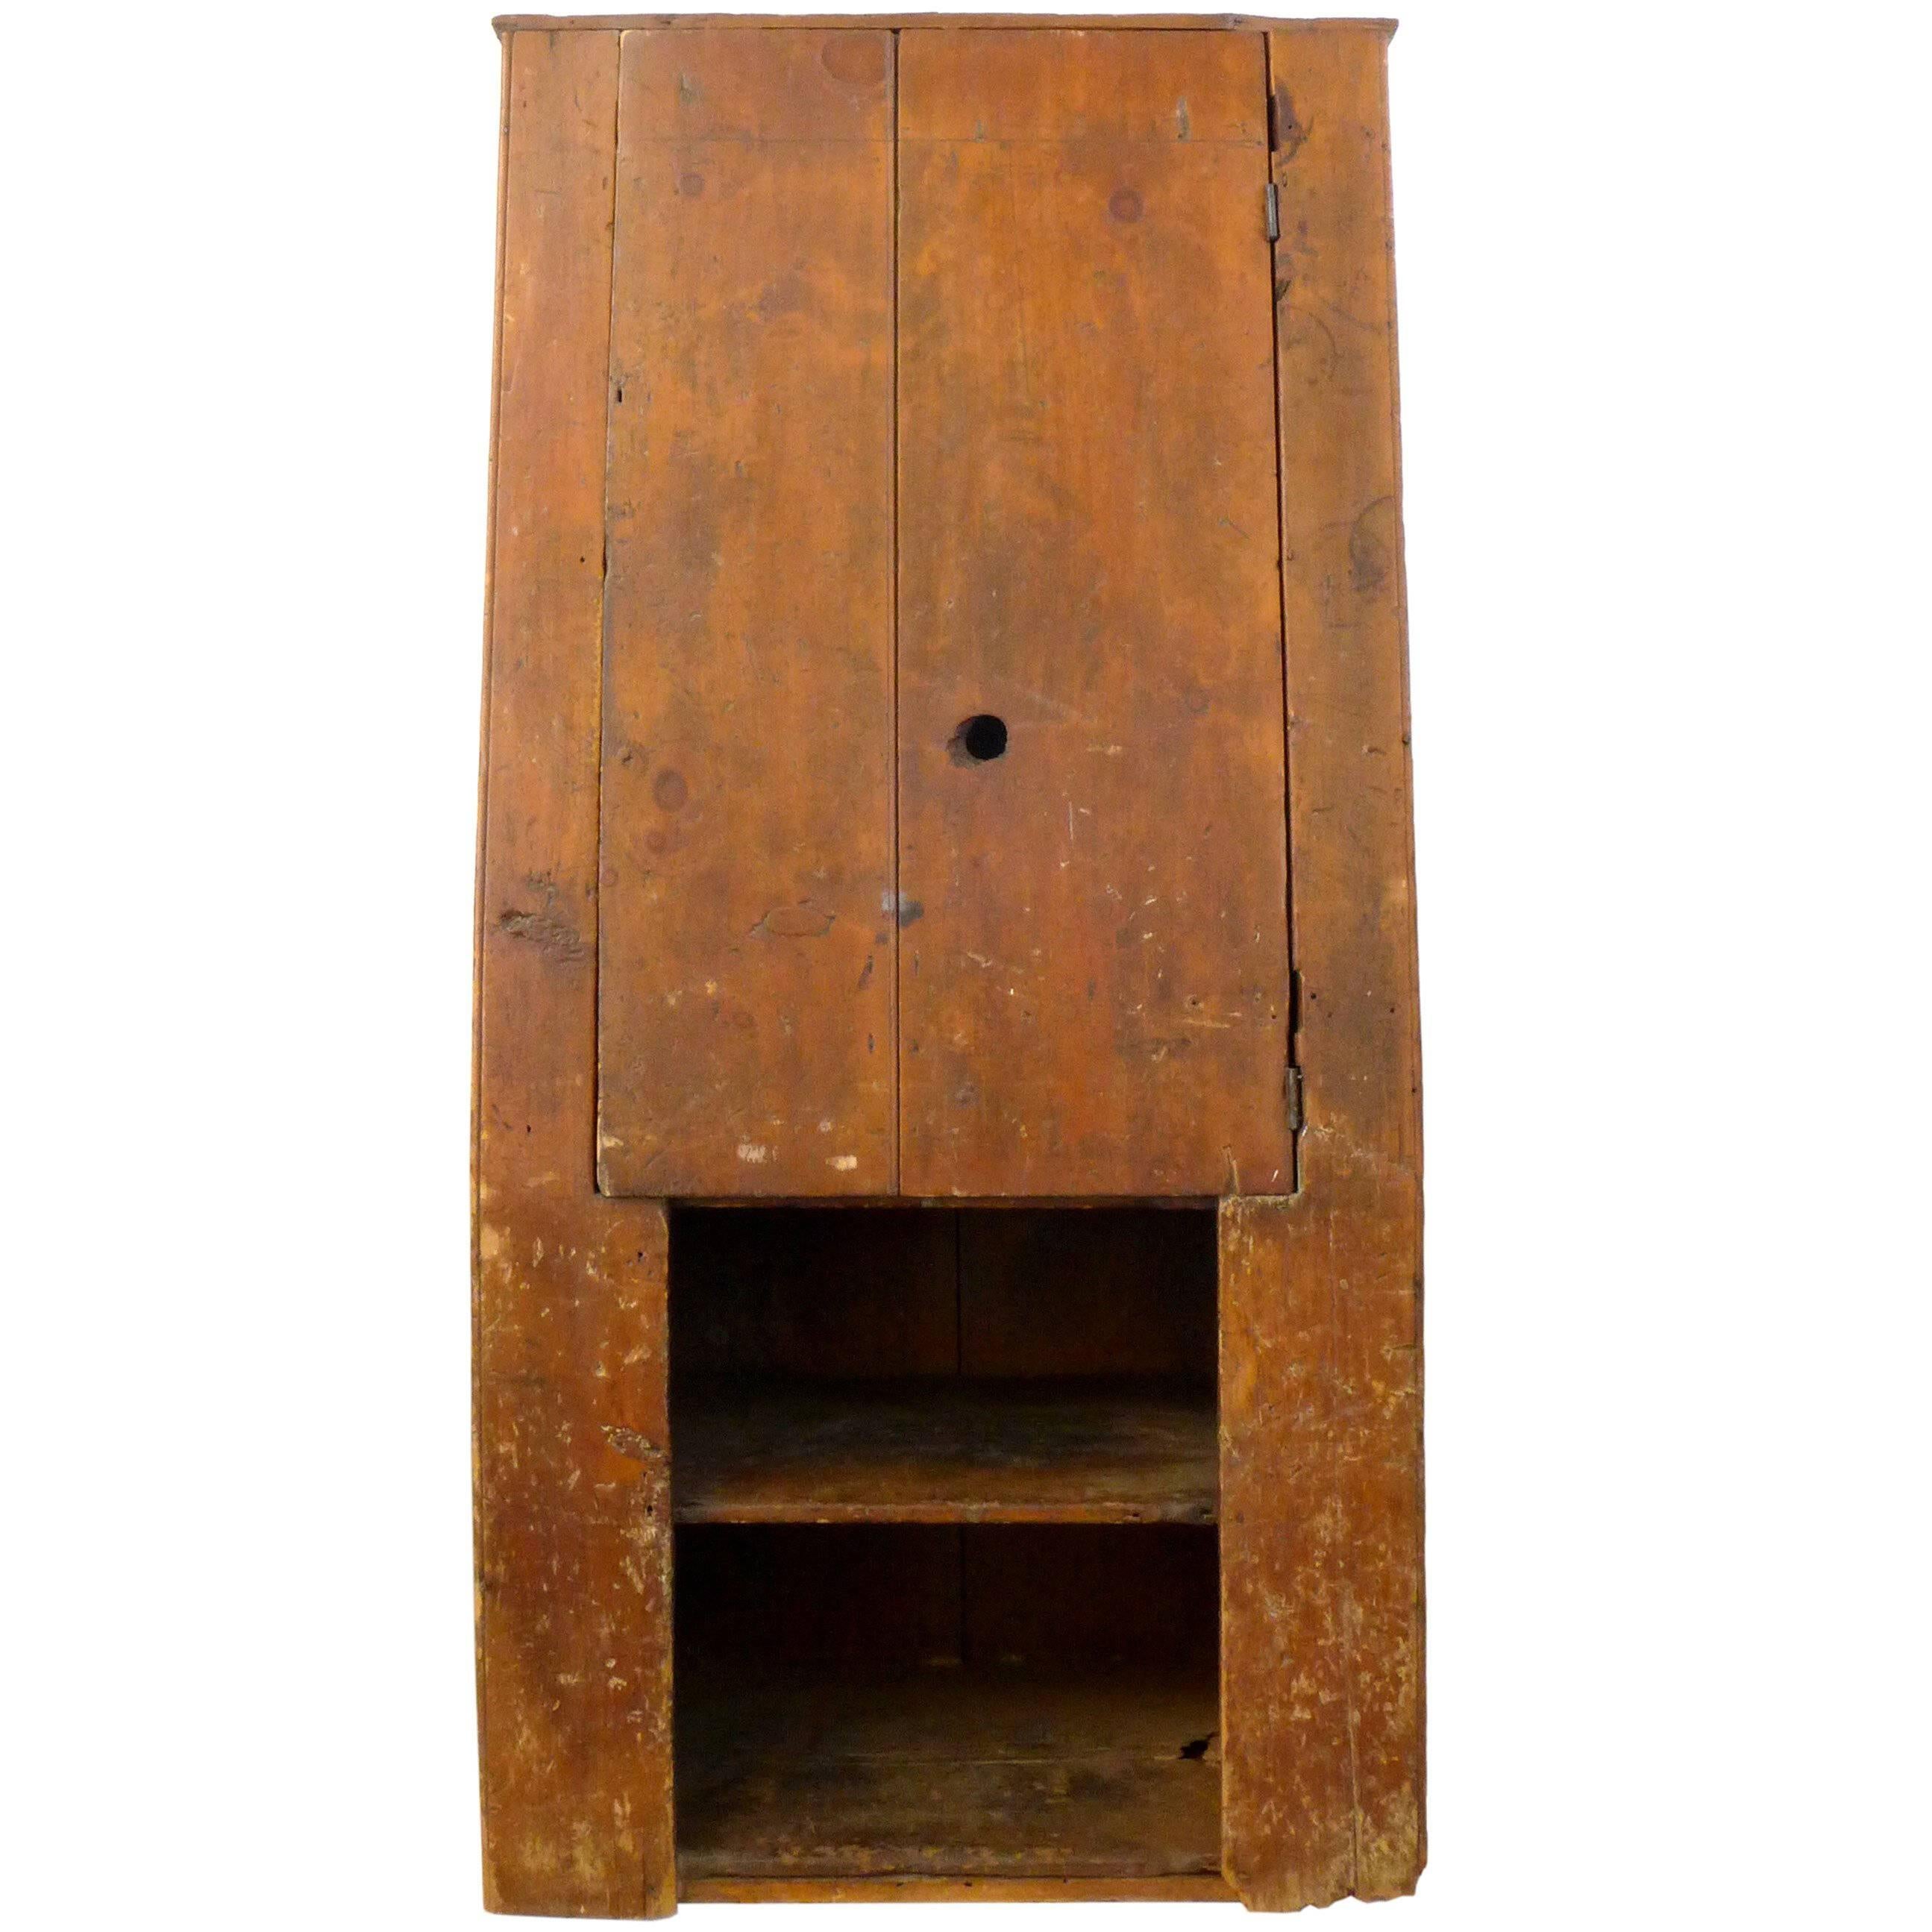 18th Century American Primitive Canted-Front Cabinet